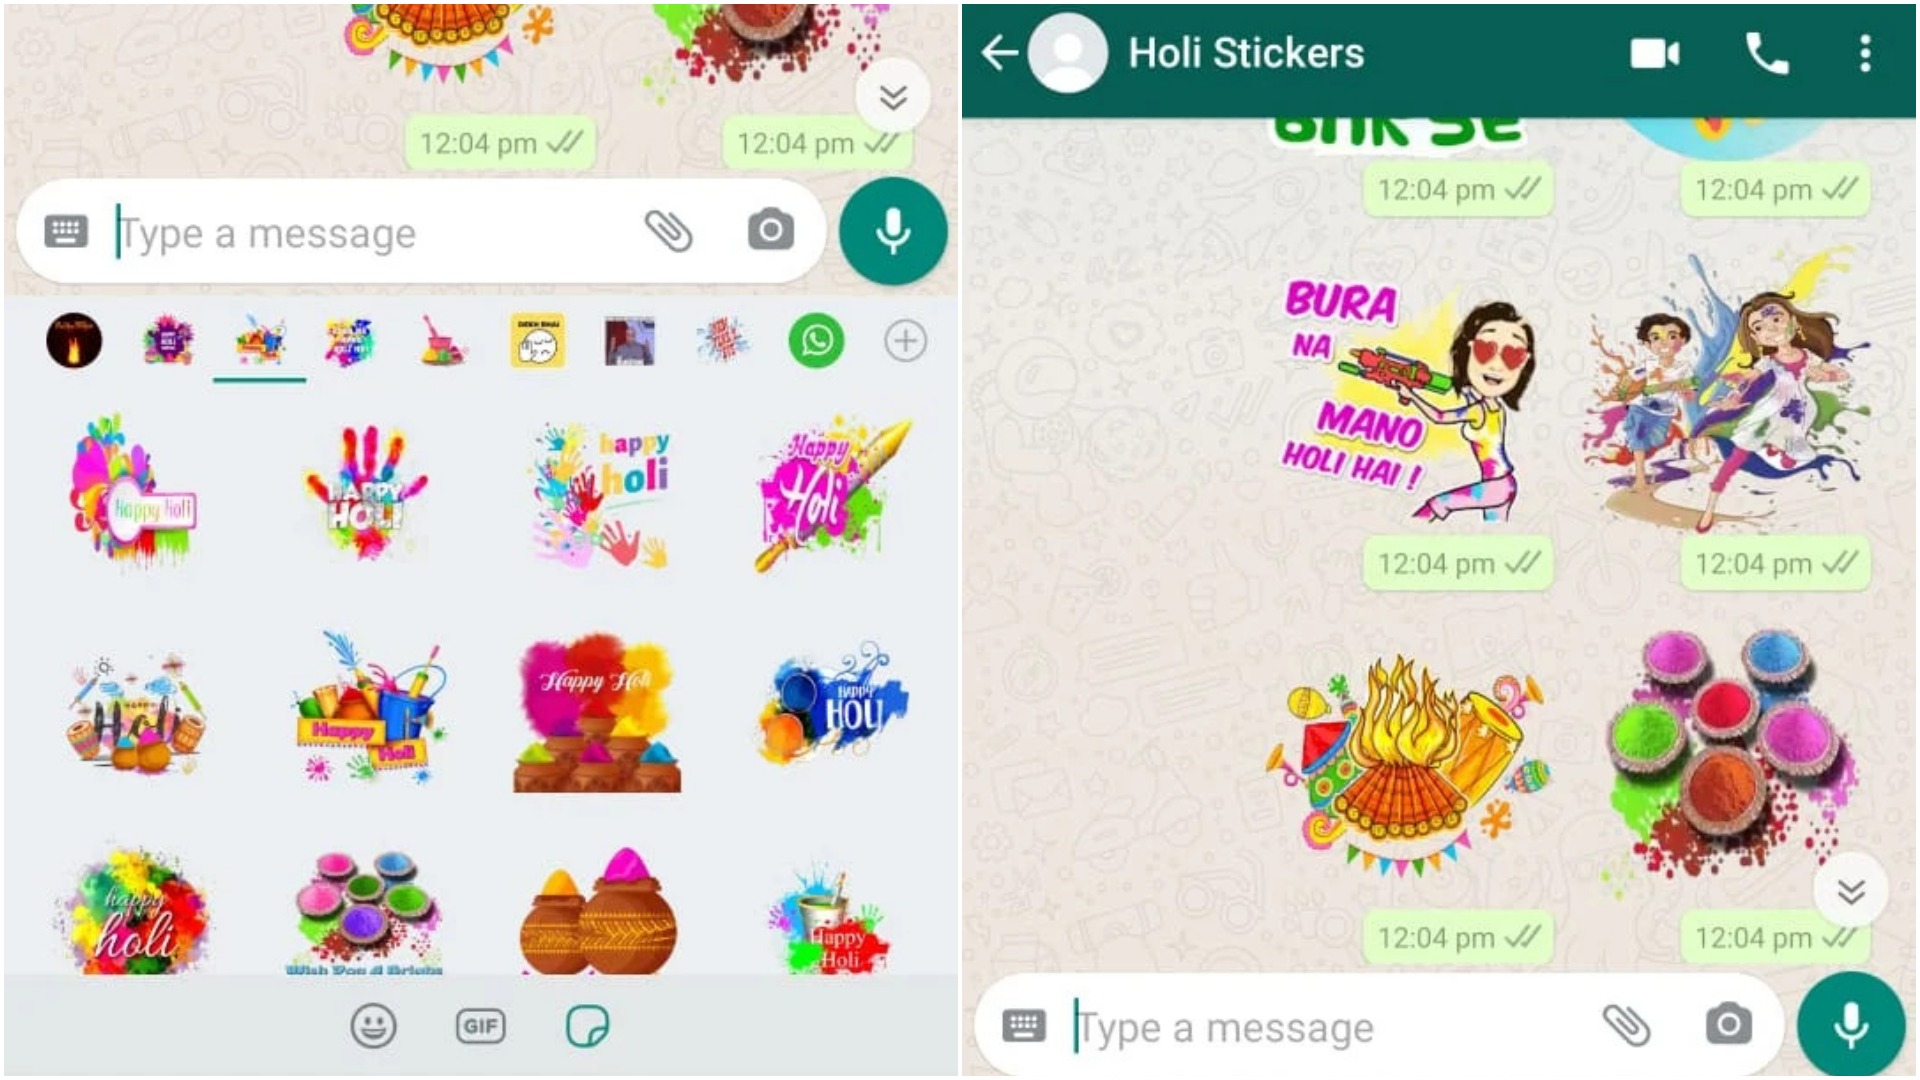 2021: How download WhatsApp Stickers on Android phones iPhones | HT Tech